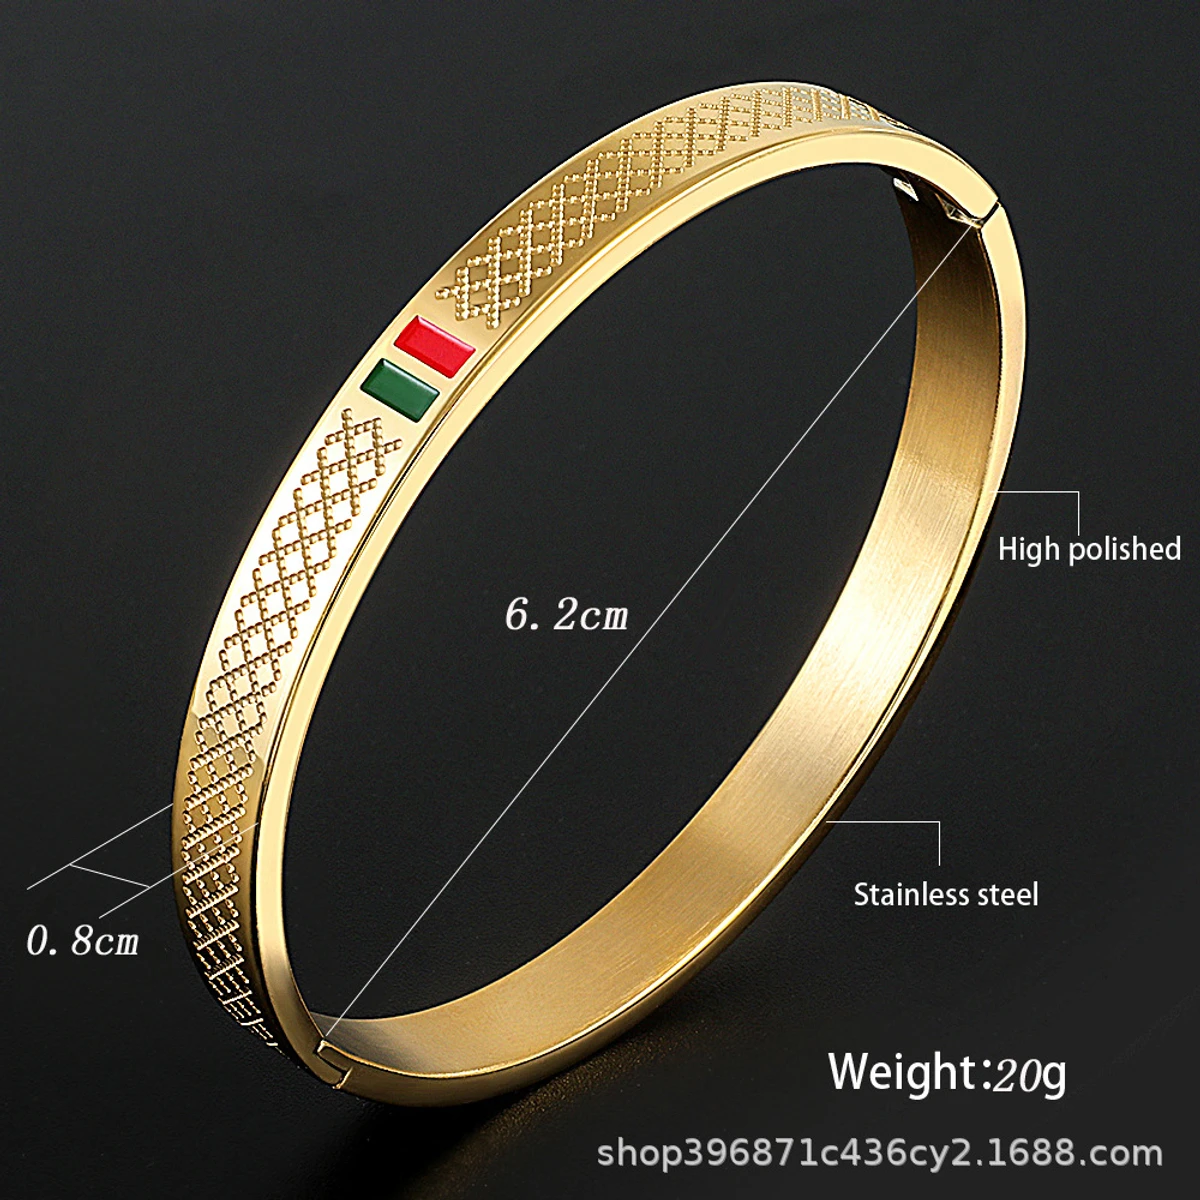 Stainless Steel Stylish Design Gucci Bracelet for Men's Fashion Jewellery